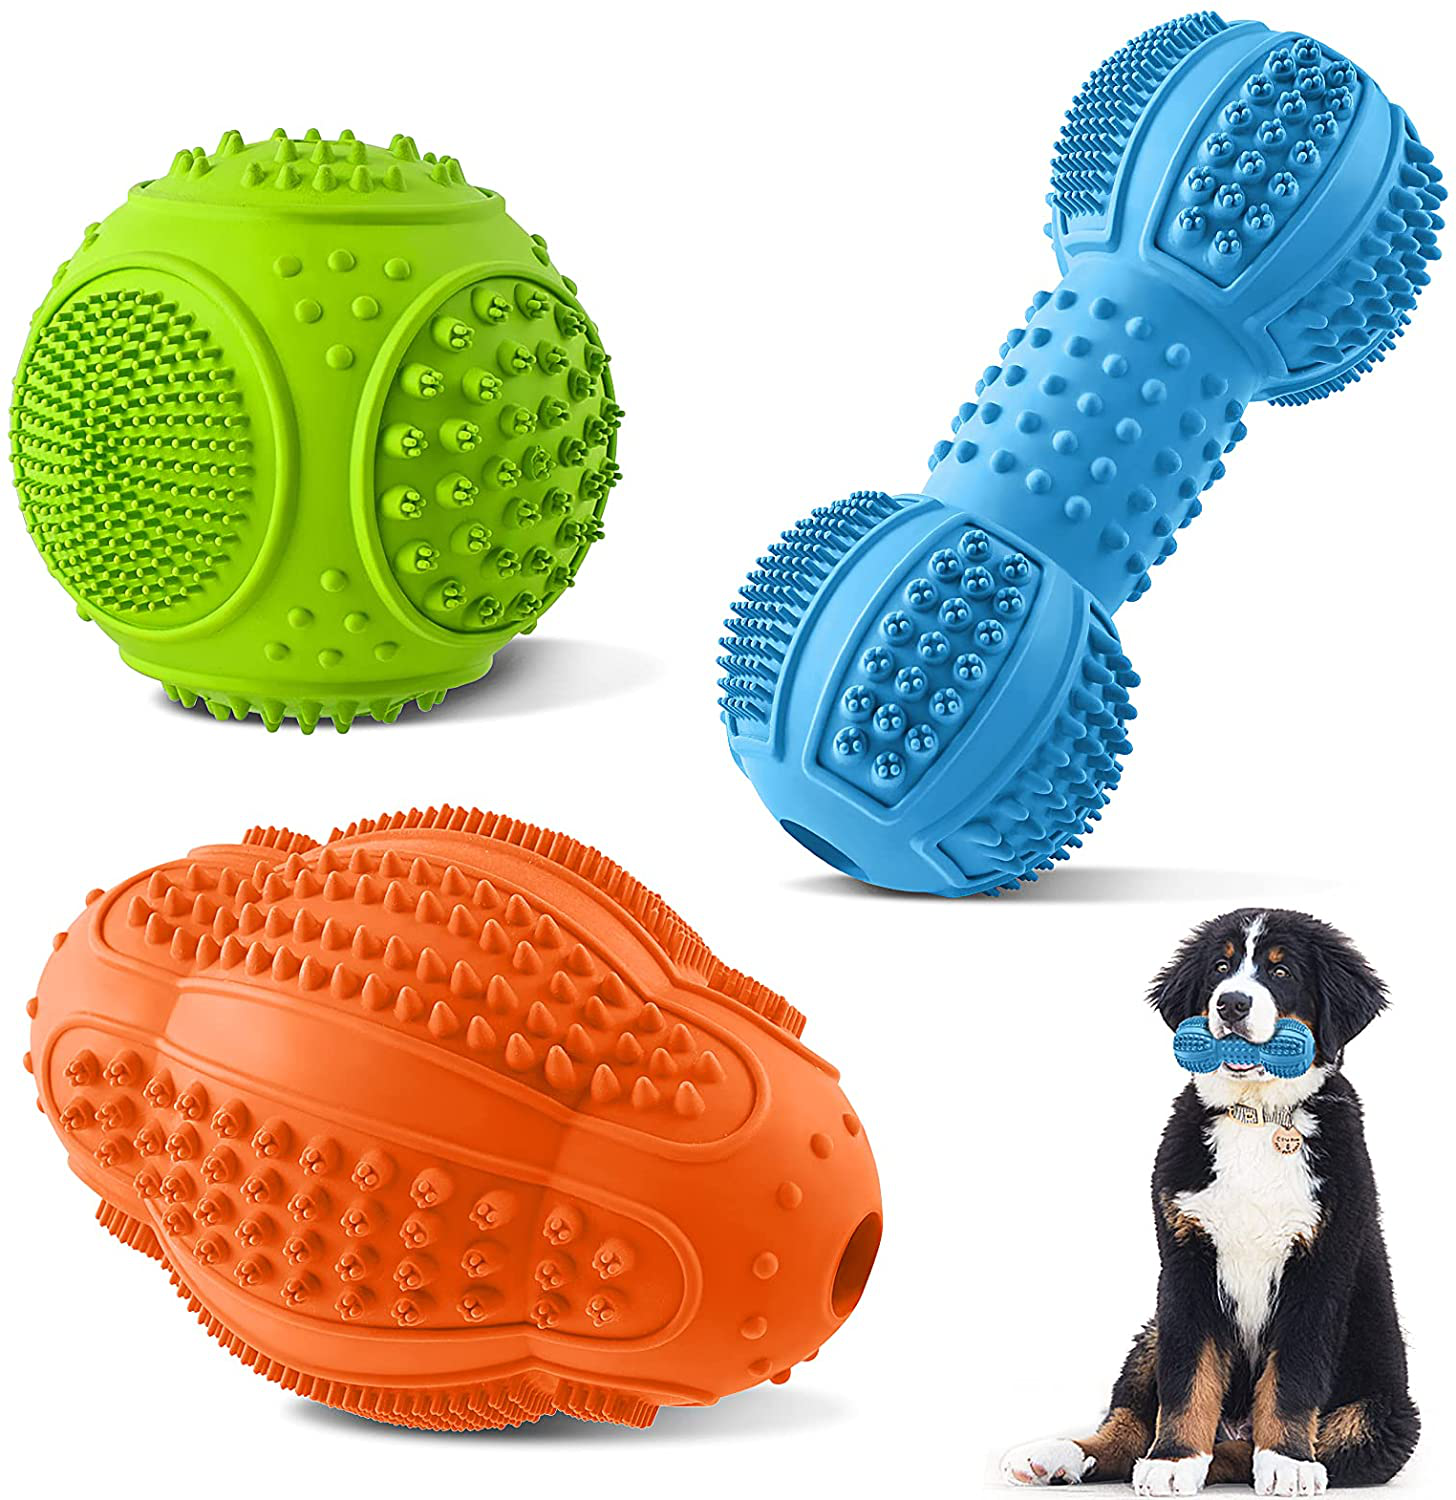 Dog Chew Toys, Dog Toys for Aggressive Chewers Large Breed, Multifunctional Teeth Cleaning and Gum Massage, Tough Dog Toys with Natural Rubber for Large and Medium Small Dog